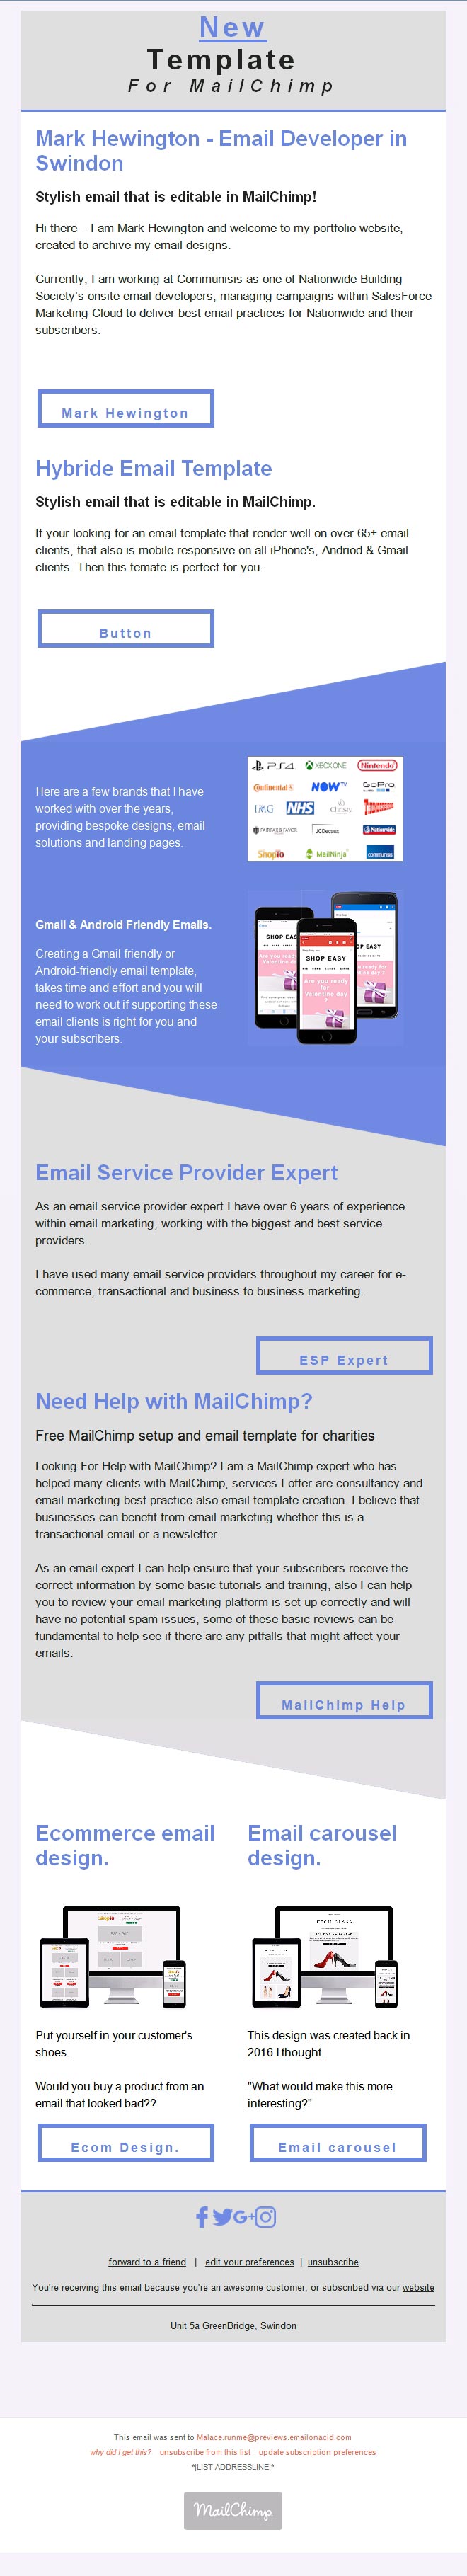 Editable MailChimp Email Template designs for Outlook